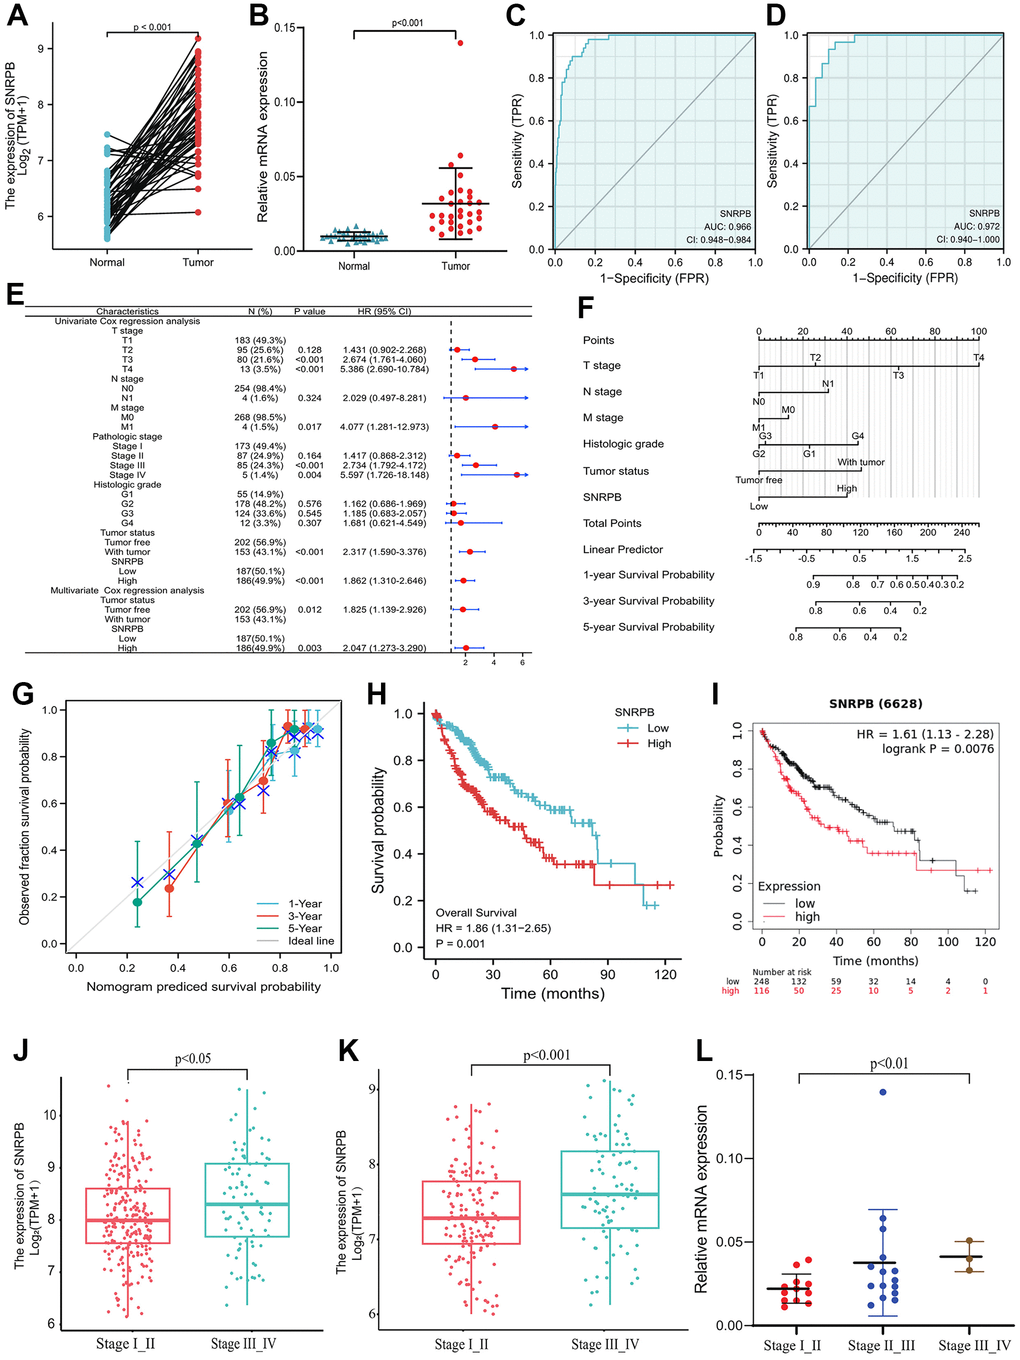 Correlation of SNRPB and the clinicopathological features and survival rates of patients with HCC. (A) mRNA relative expression levels of SNRPB in HCC tissues and paired adjacent tissues acquired from TCGA. (B) mRNA relative expression levels of SNRPB in 30 HCC tissues and 30 paired adjacent tissues. (C) ROC analysis of the diagnosis of SNRPB in HCC patients using data obtained from TCGA. (D) ROC analysis of SNRPB expression in 30 HCC and 30 paired adjacent tissues. (E) Forest plot using univariate and multivariate Cox regression analysis. (F) Nomogram of the overall survival (OS) for patients with HCC (1, 3, and 5 years). (G) Calibration curve of OS at 1, 3 and 5 years. The gray diagonal is the ideal case line and the blue cross represents the result of hierarchical Kaplan-Meier correction for each point. (H) Relationship between OS and SNRPB expression in TCGA. (I) Relationship between OS and SNRPB expression obtained using the Kaplan-Meier Plotter. (J) Relationship between HCC stages and the expression level of SNRPB in TCGA dataset. (K) Relationship between HCC stages and the expression level of SNRPB in ICGC dataset. (L) Relationship between HCC stages and the expression level of SNRPB in 30 HCC tissues.